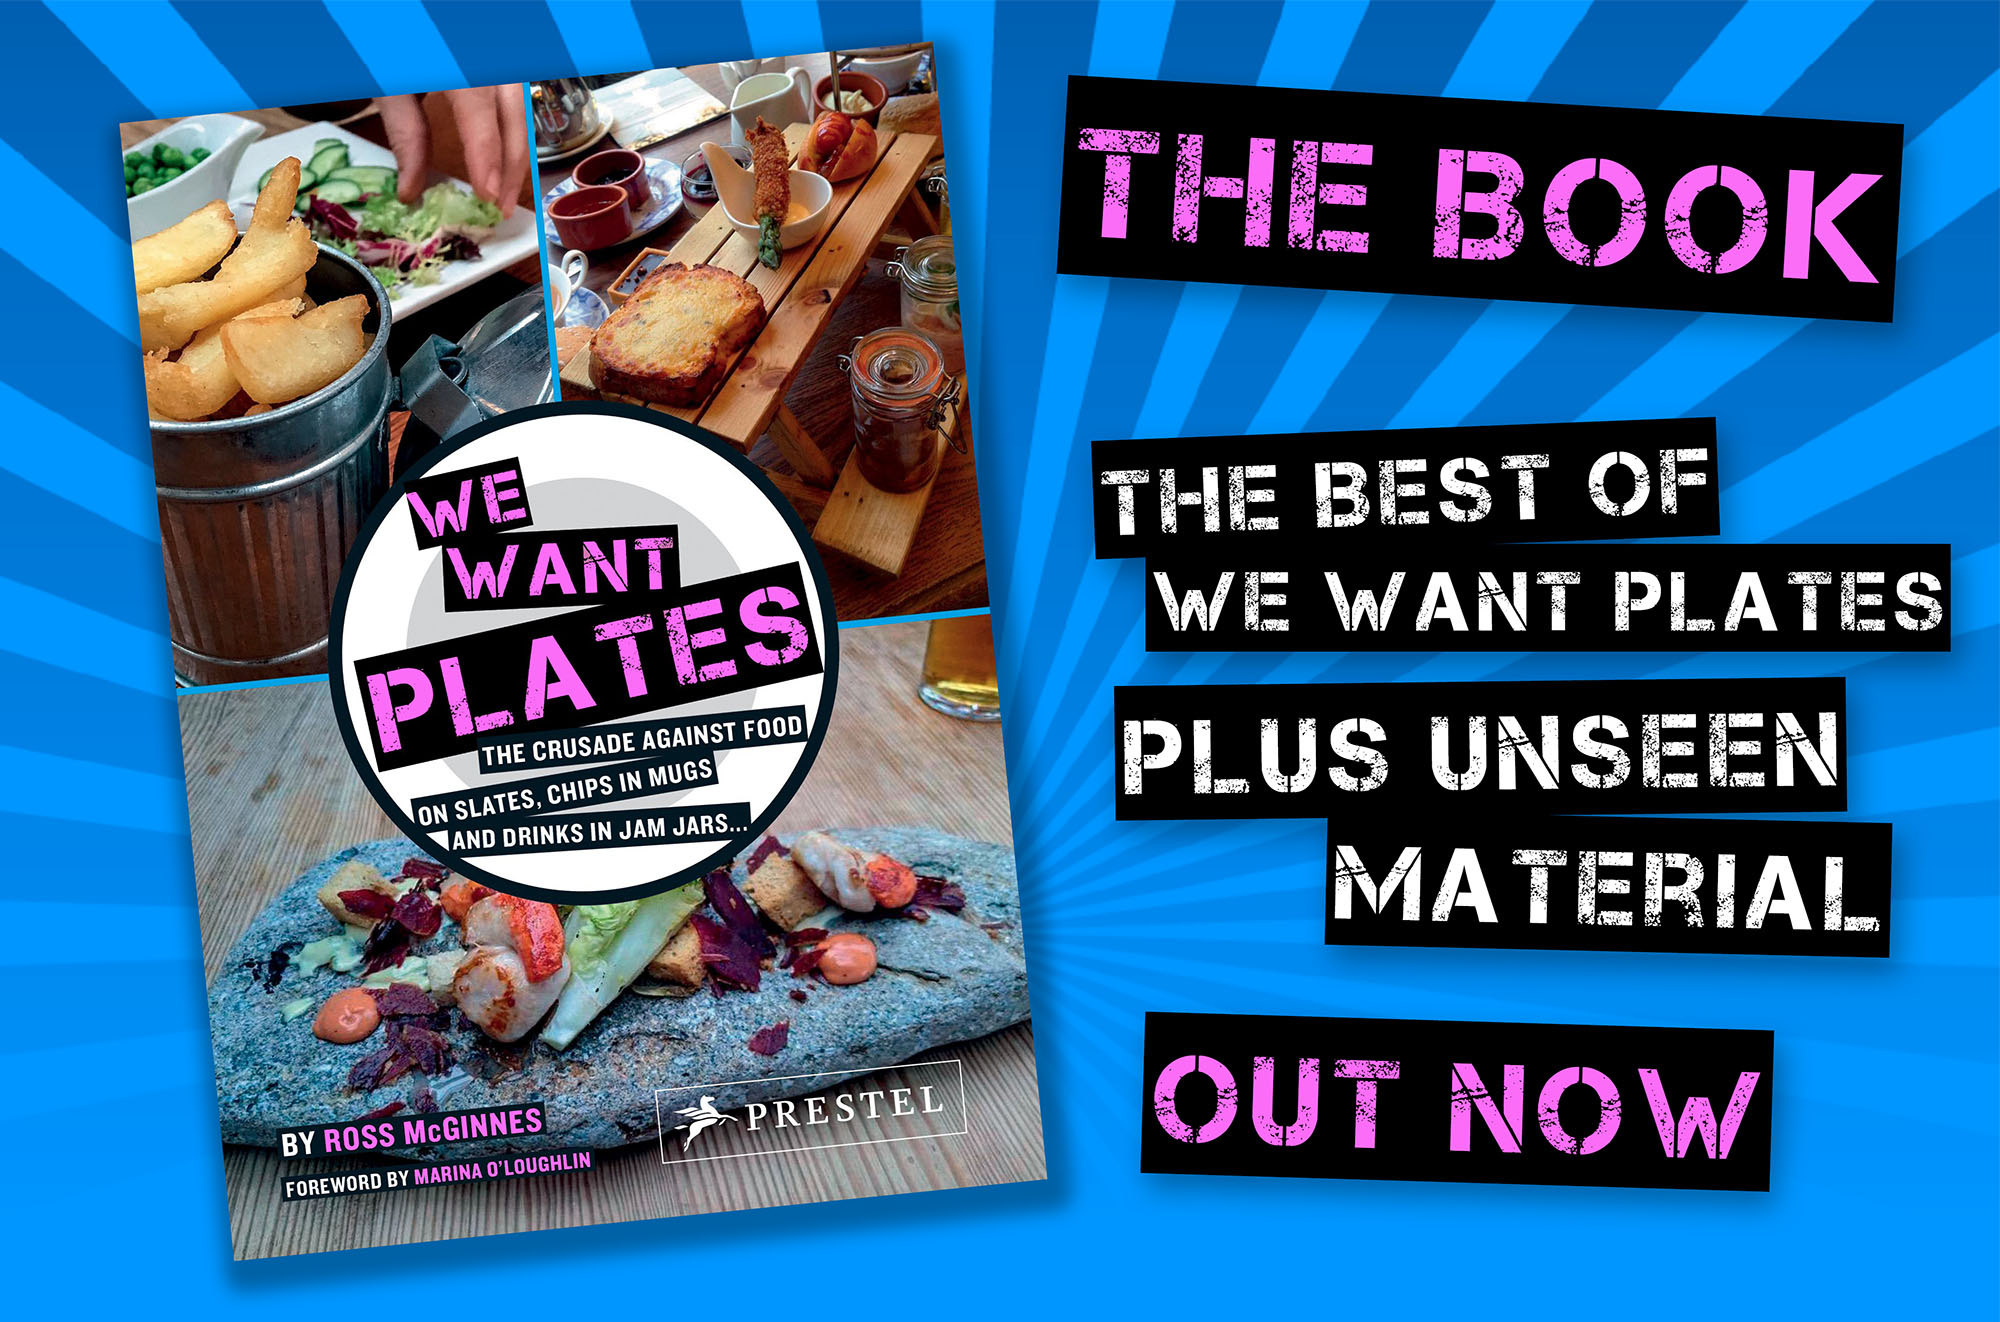 We Want Plates book